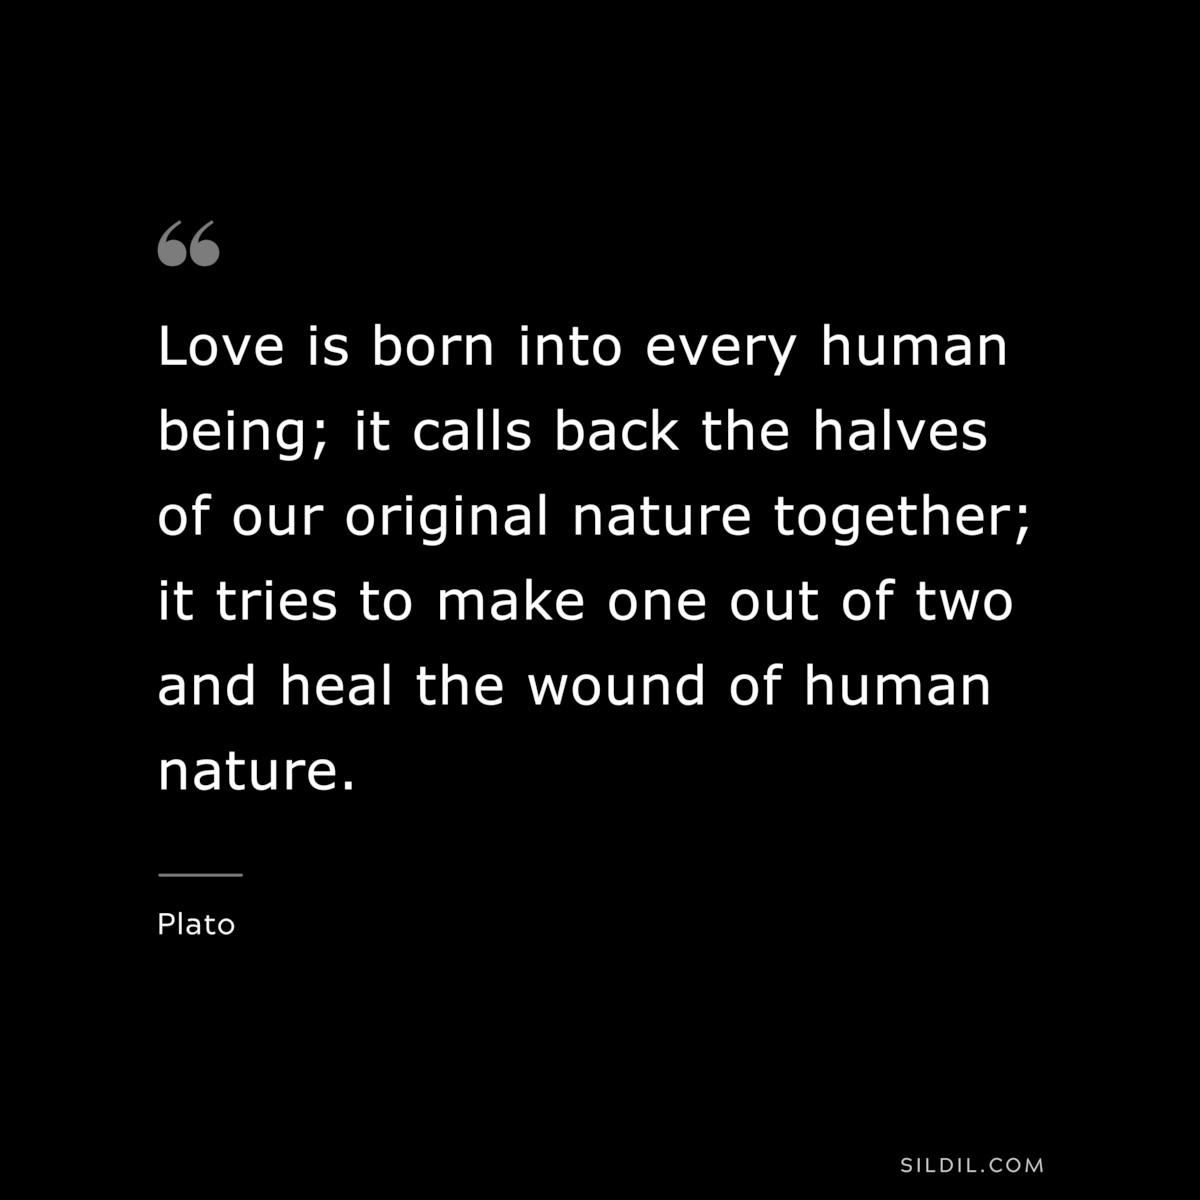 Love is born into every human being; it calls back the halves of our original nature together; it tries to make one out of two and heal the wound of human nature. ― Plato